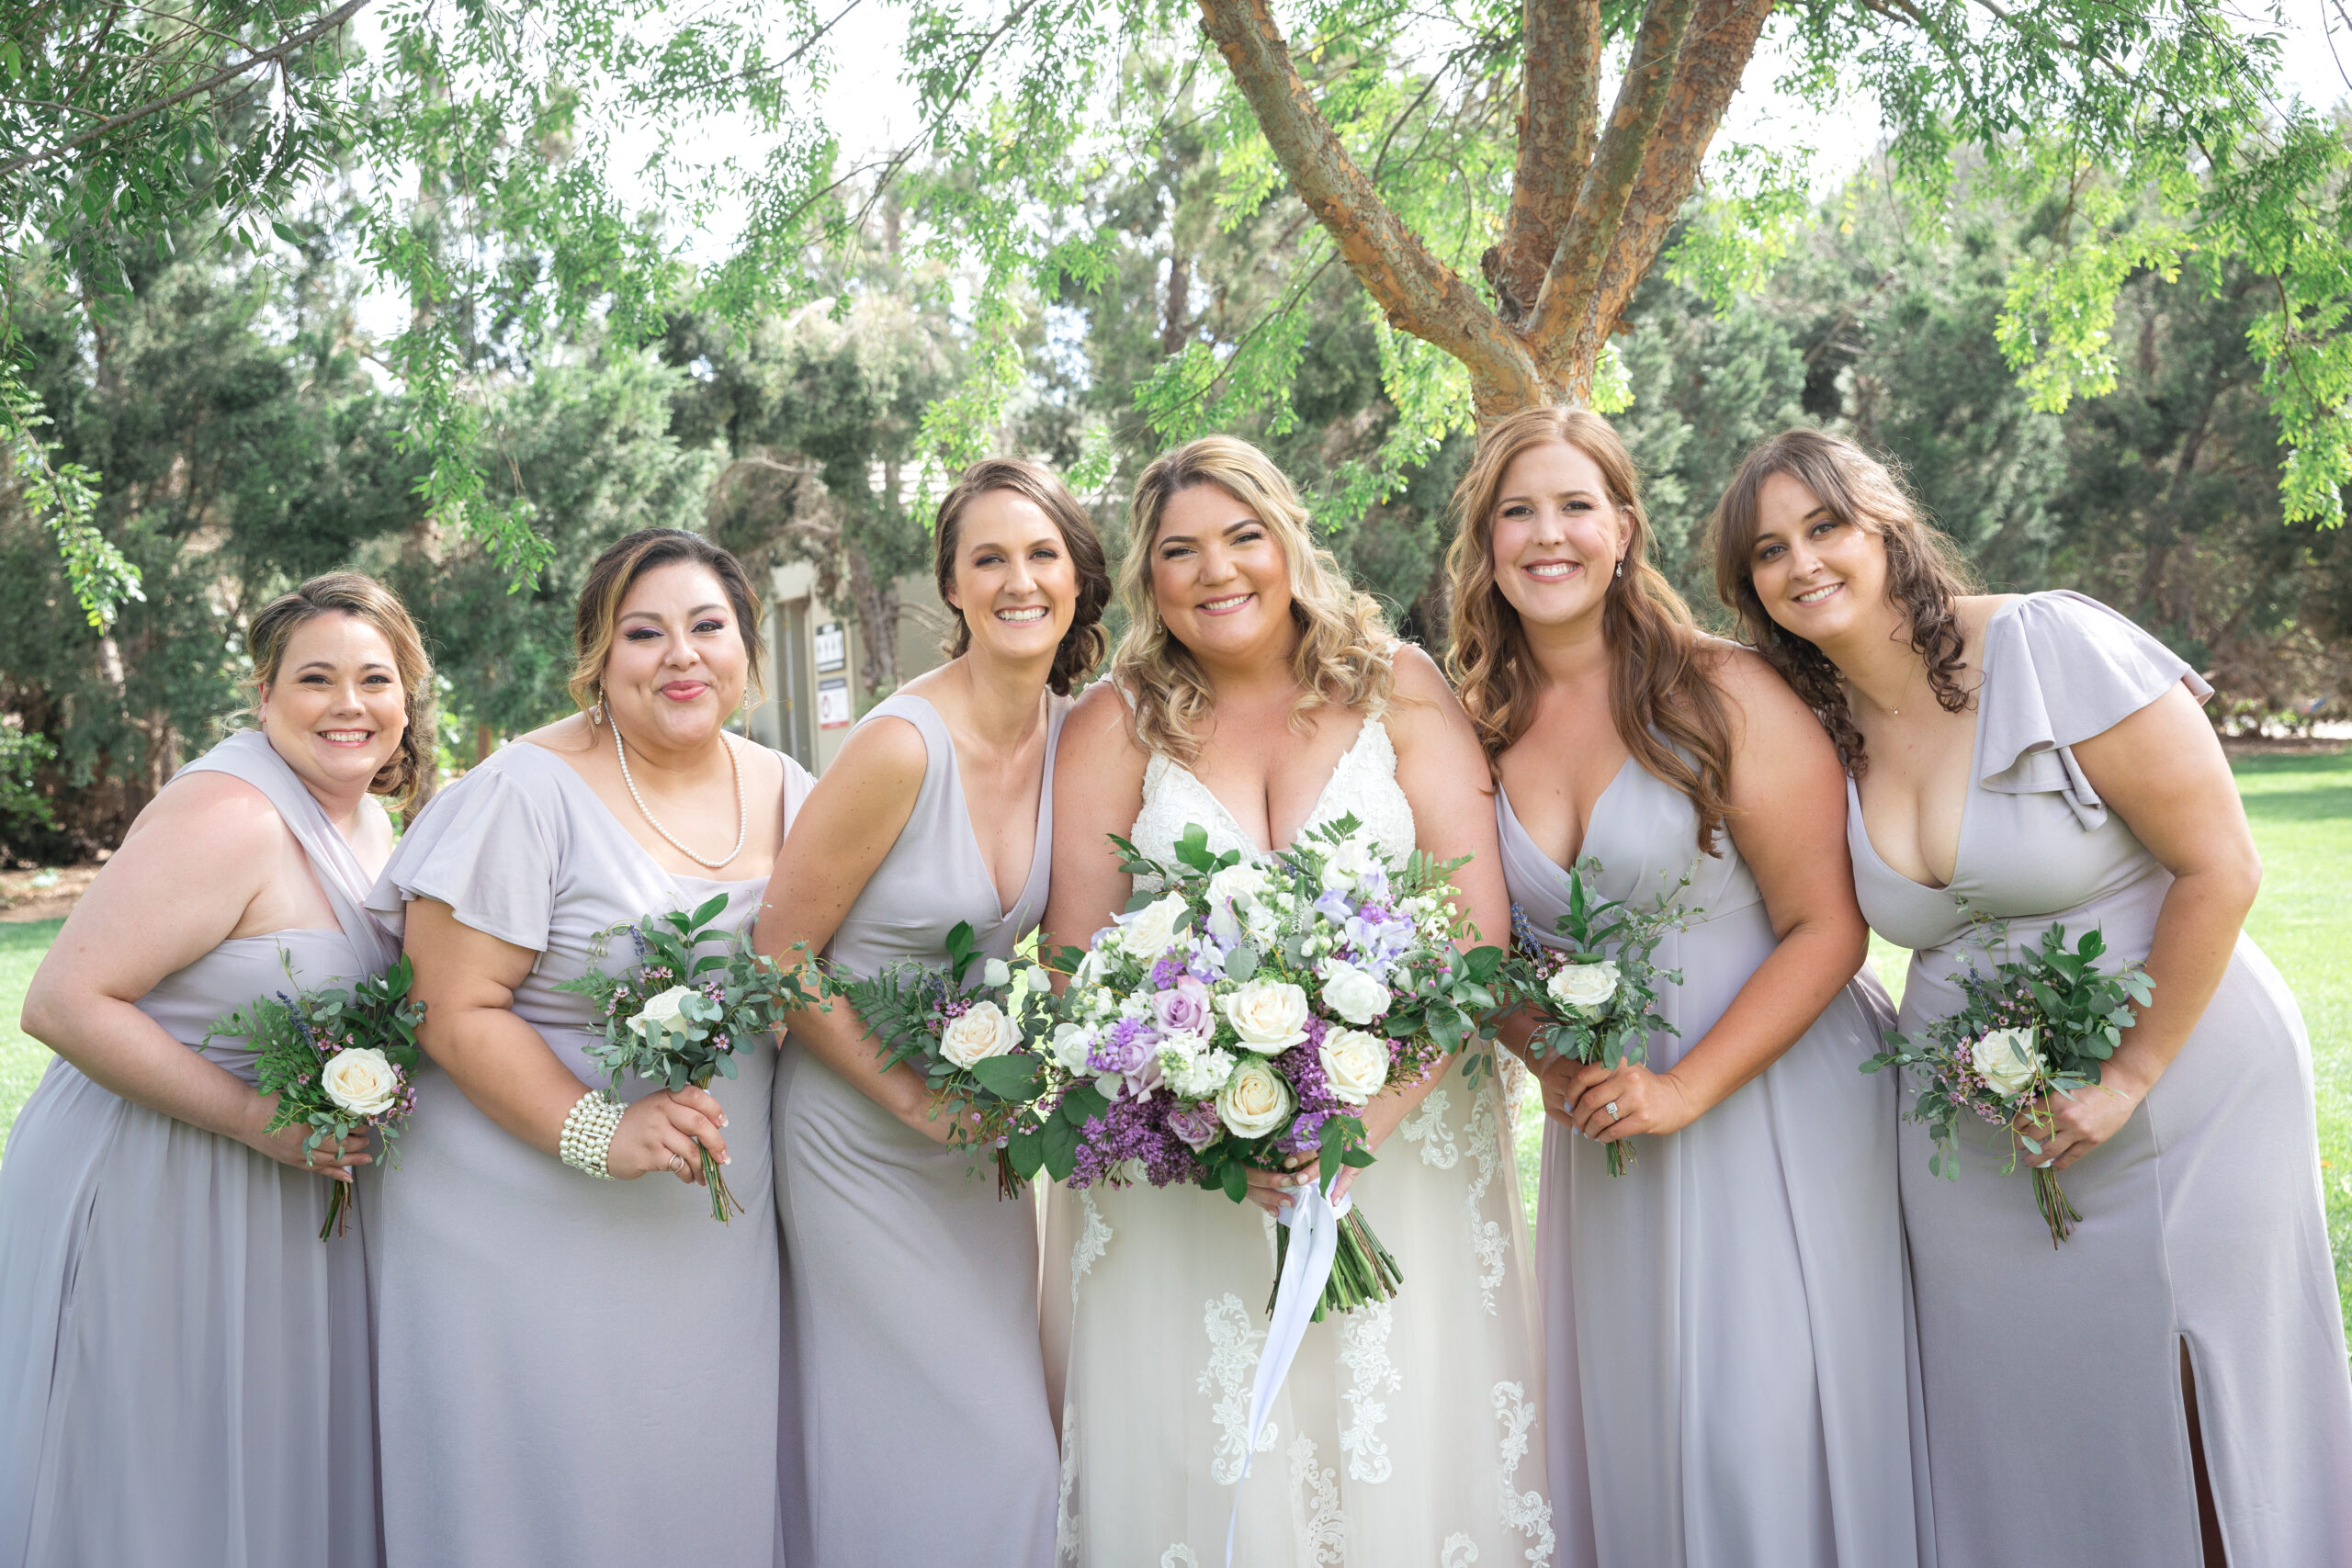 Real Wedding | Rustic Backyard BBQ Wedding in San Diego | Captured Forever Photography